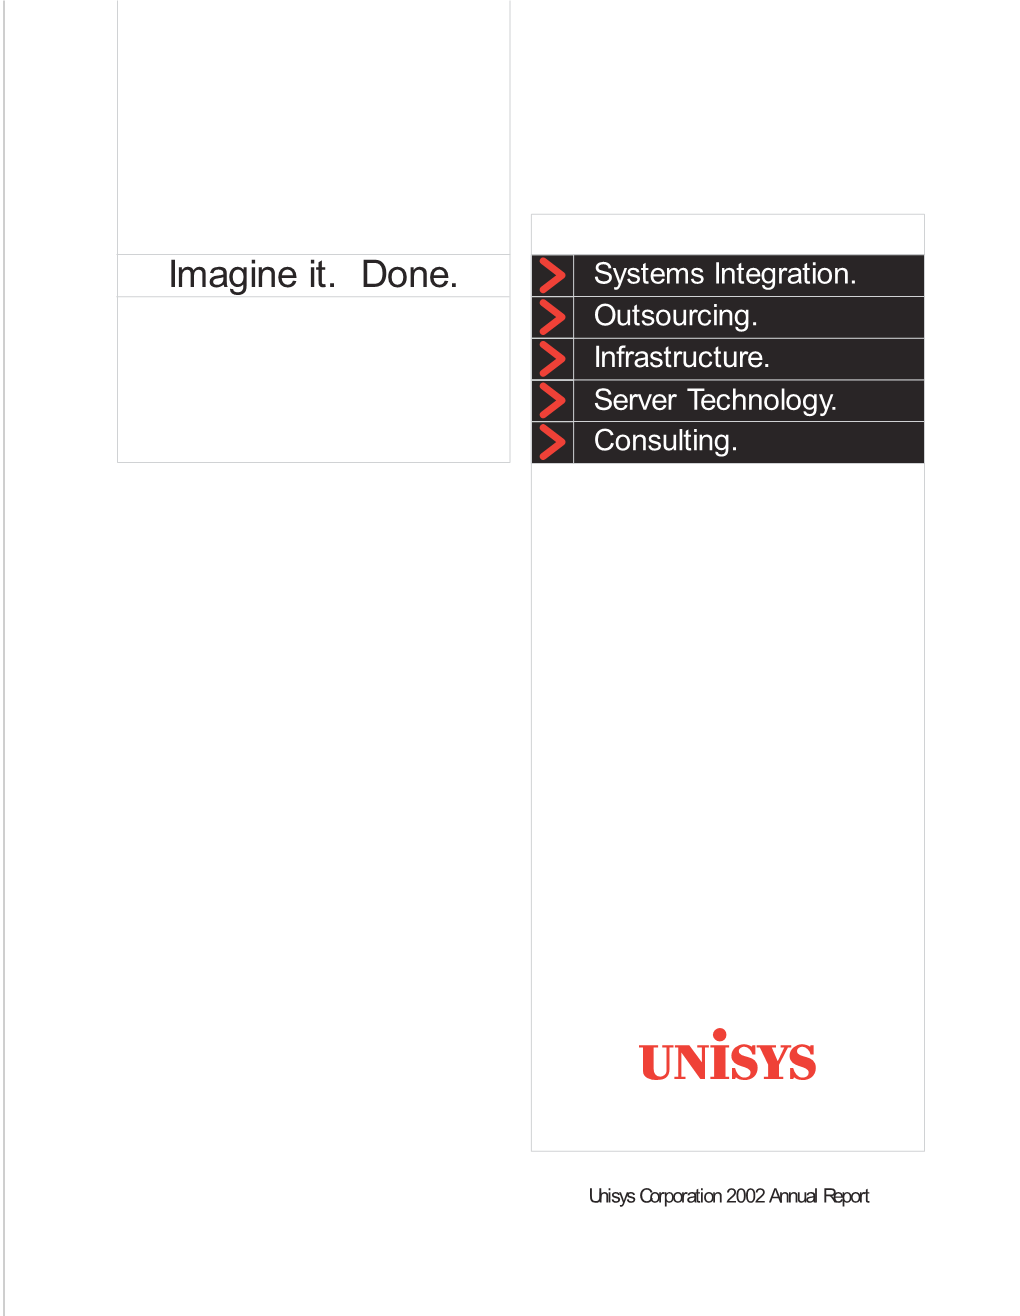 Unisys 2002 Annual Report